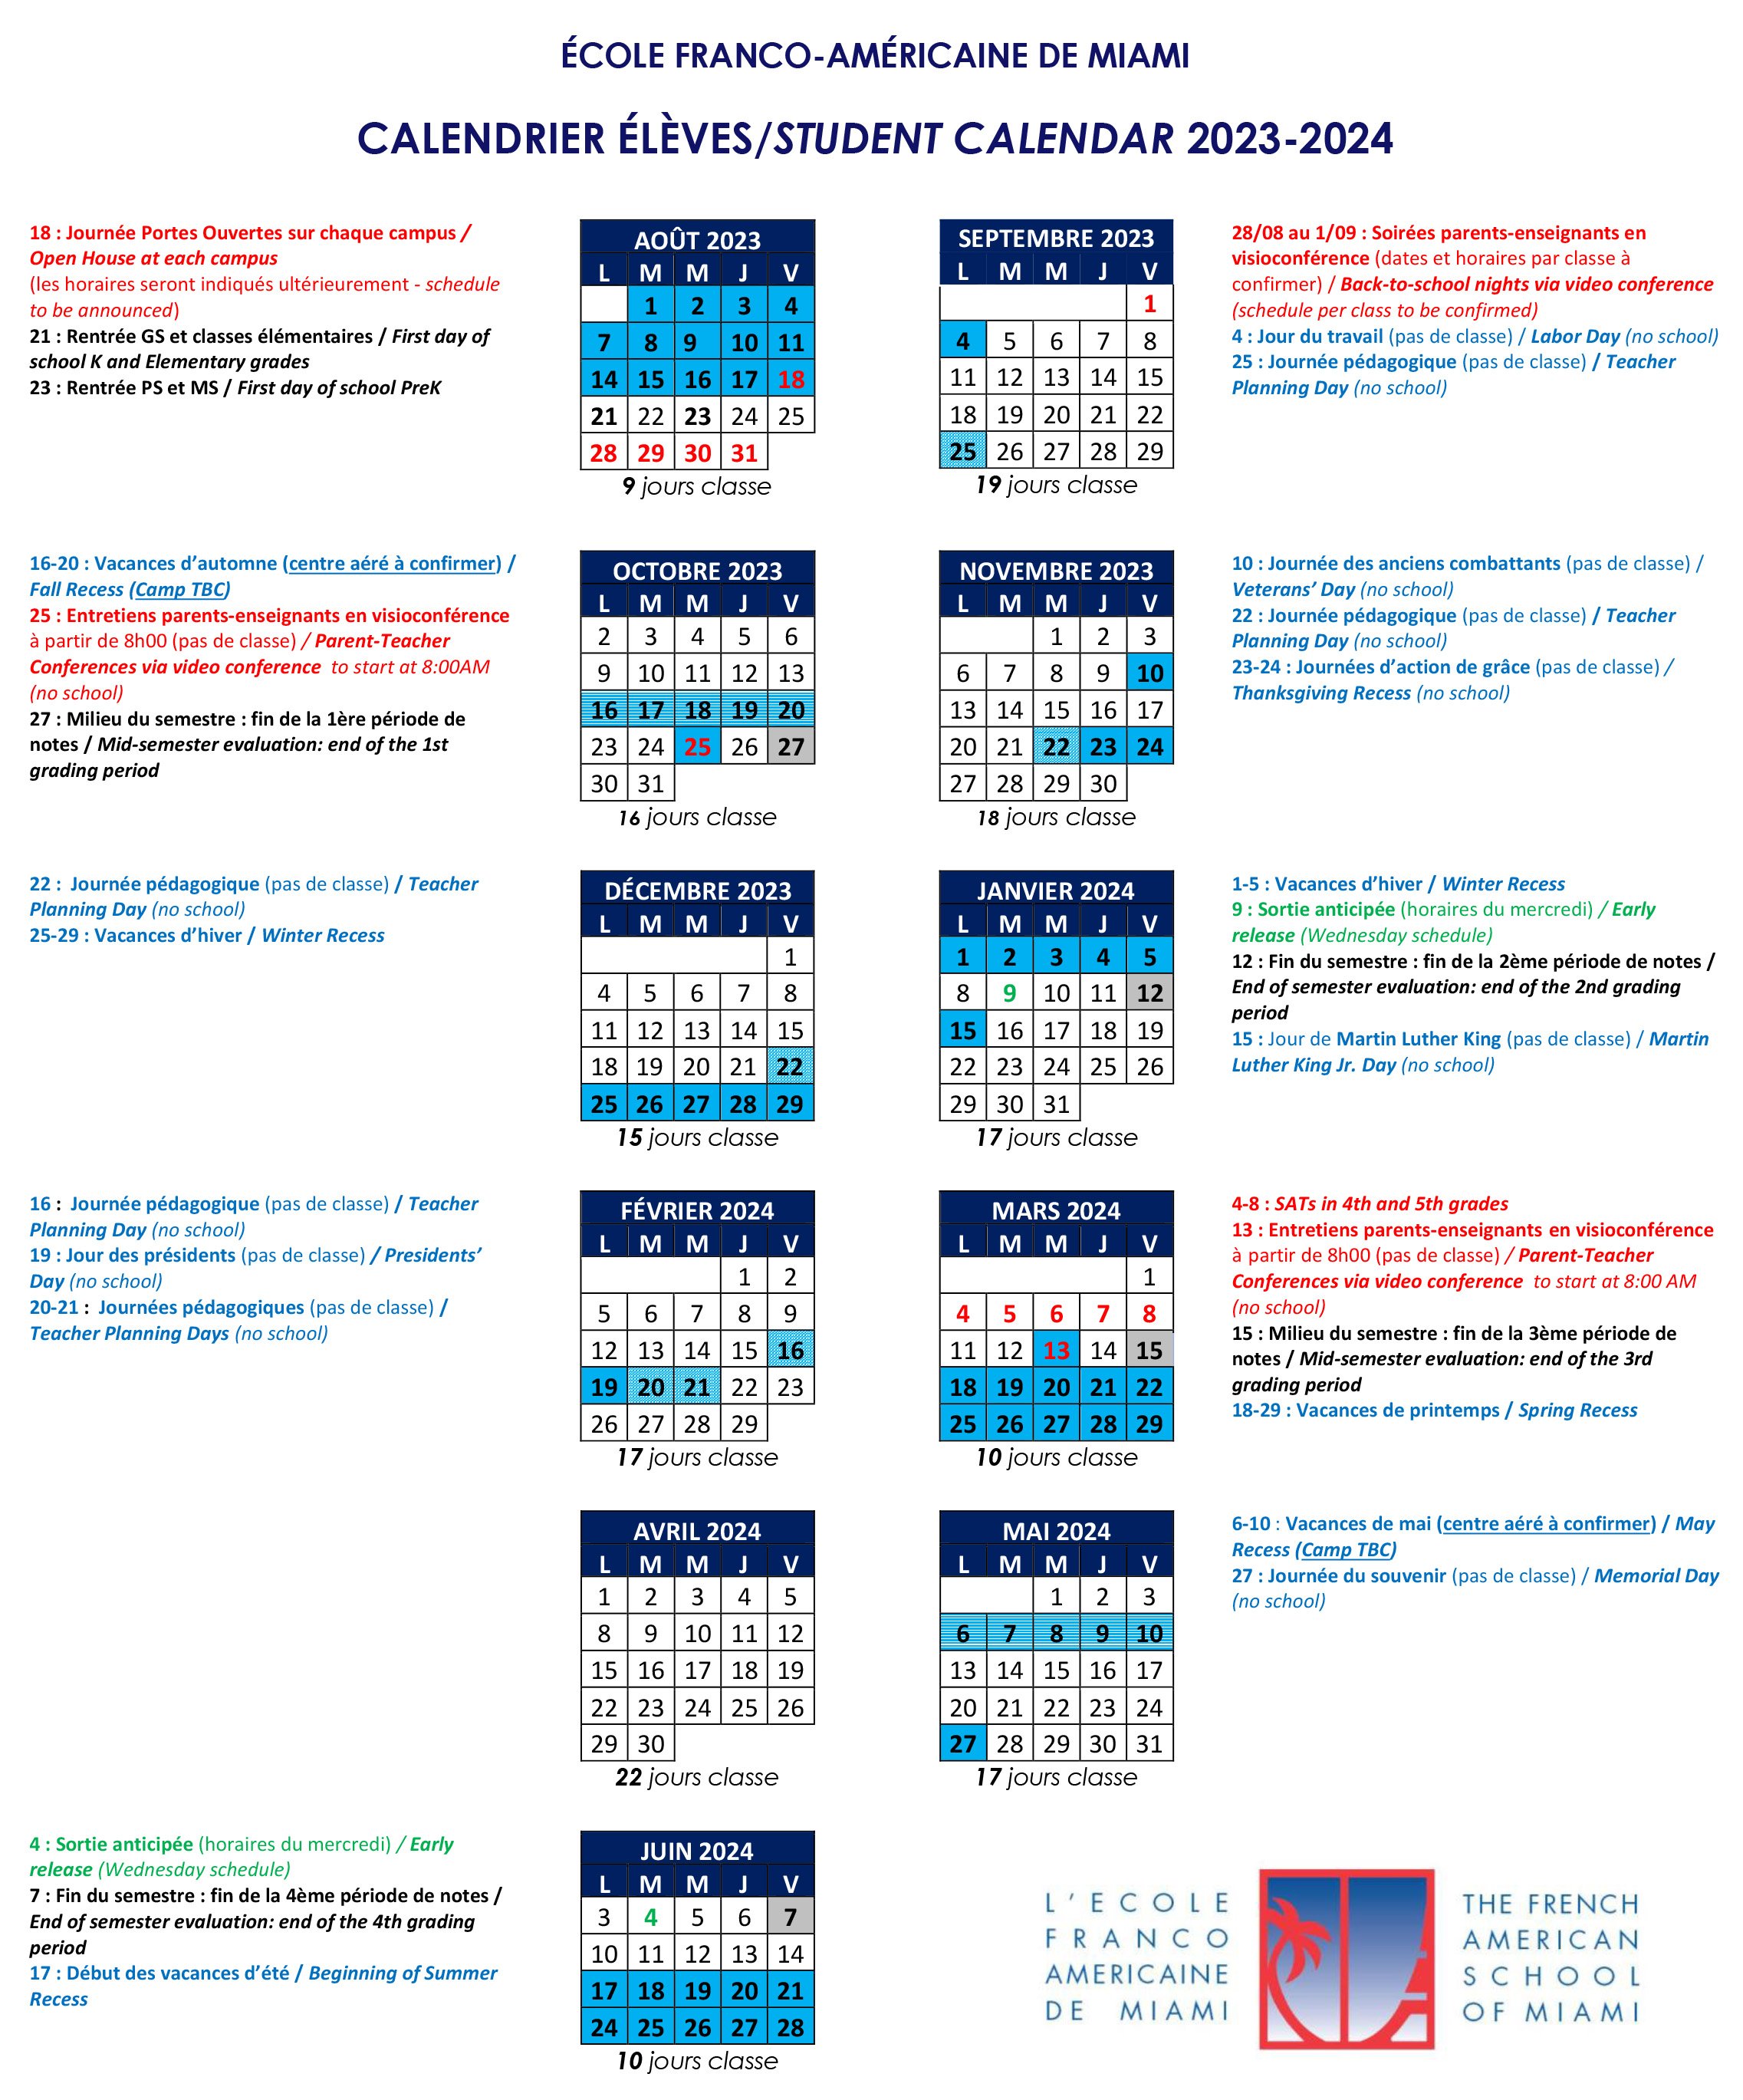 calendrier scolaires 2023-24